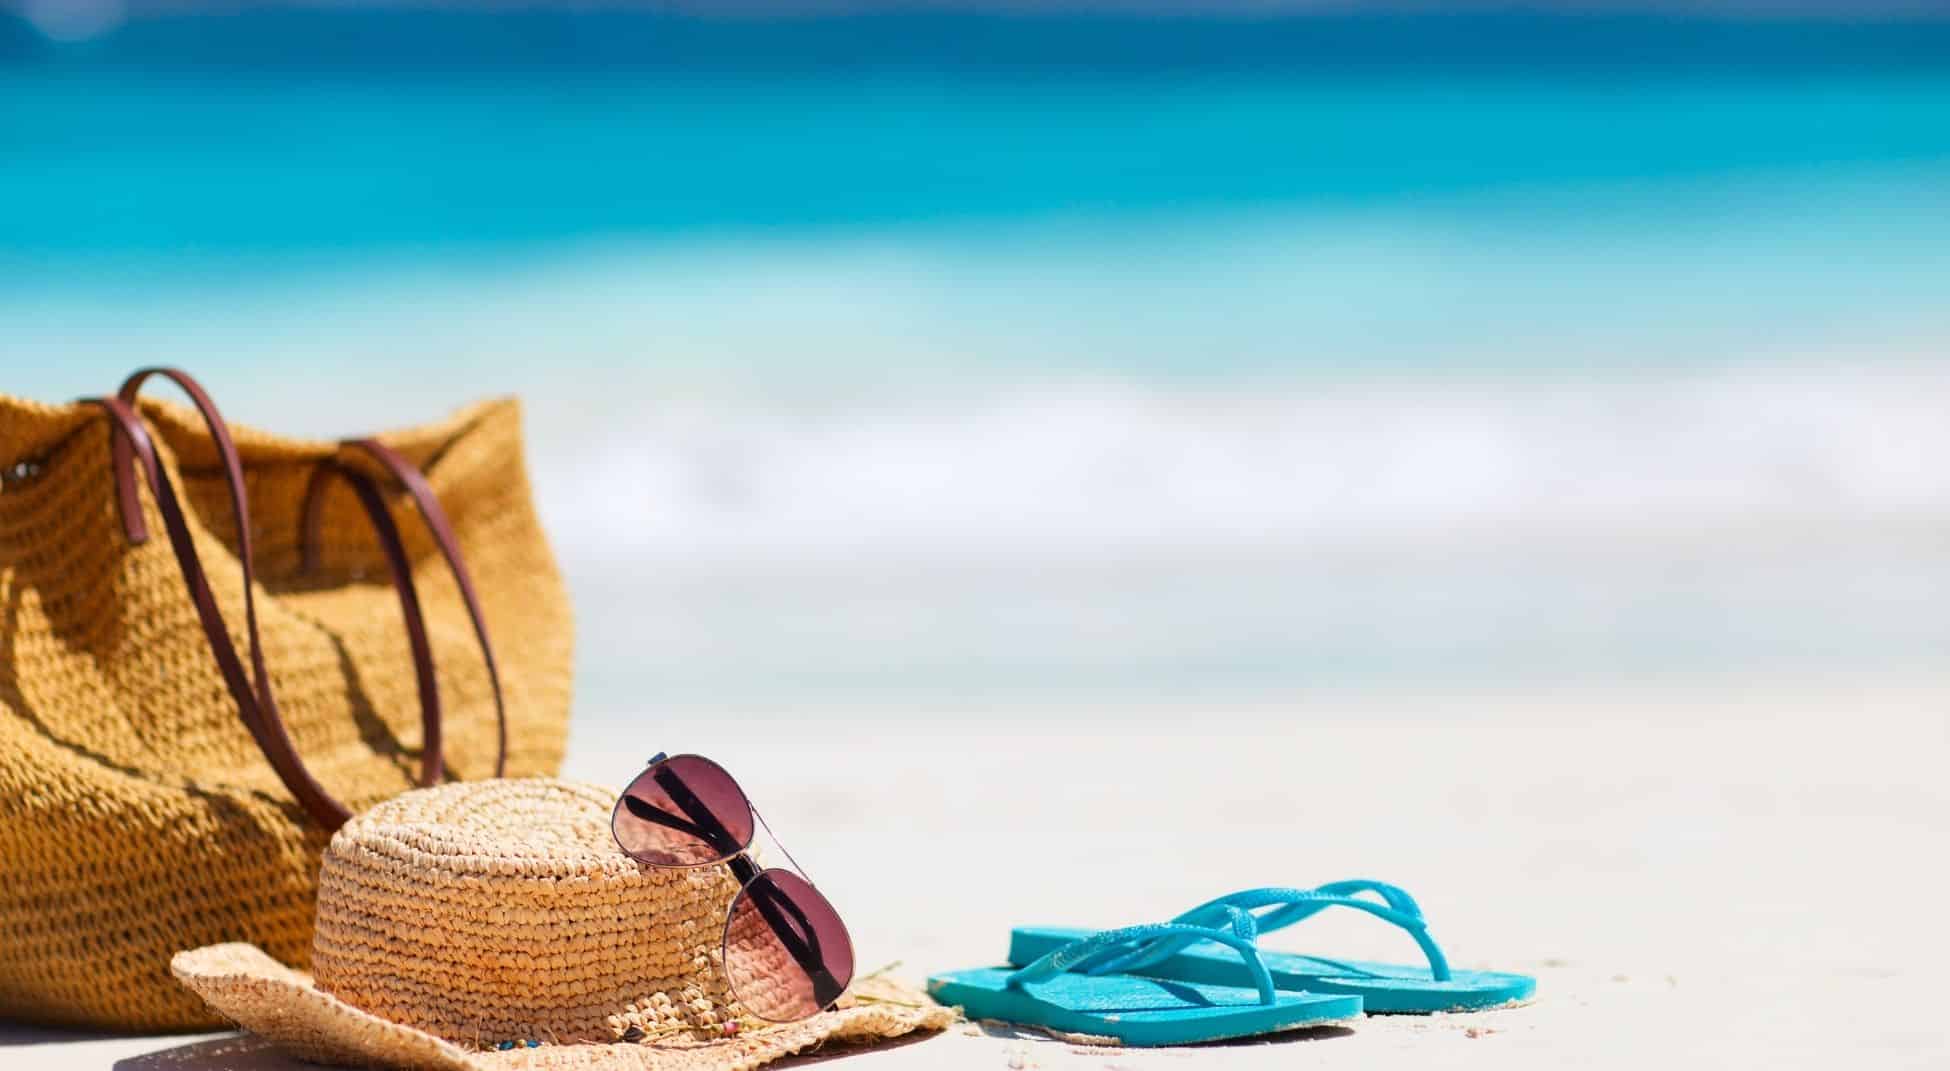 shot of hat, glasses, beach bag, and sandals on the sand